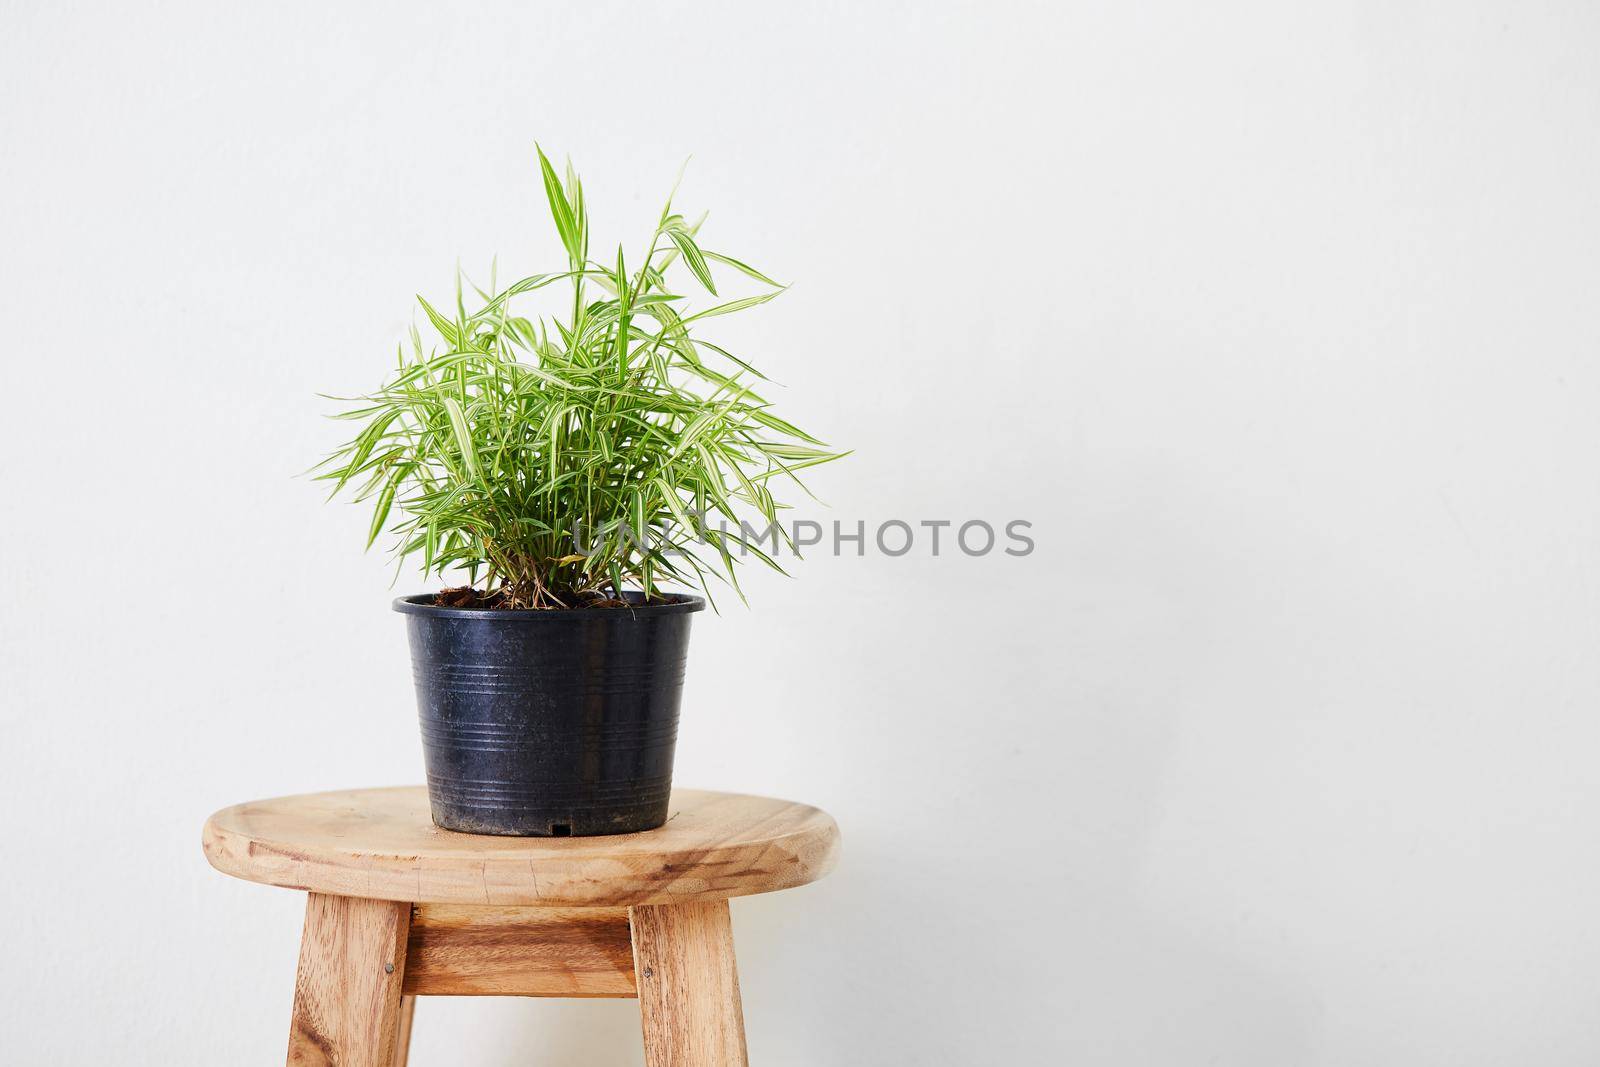 Little grass or bamboo in pot of minimalism photo